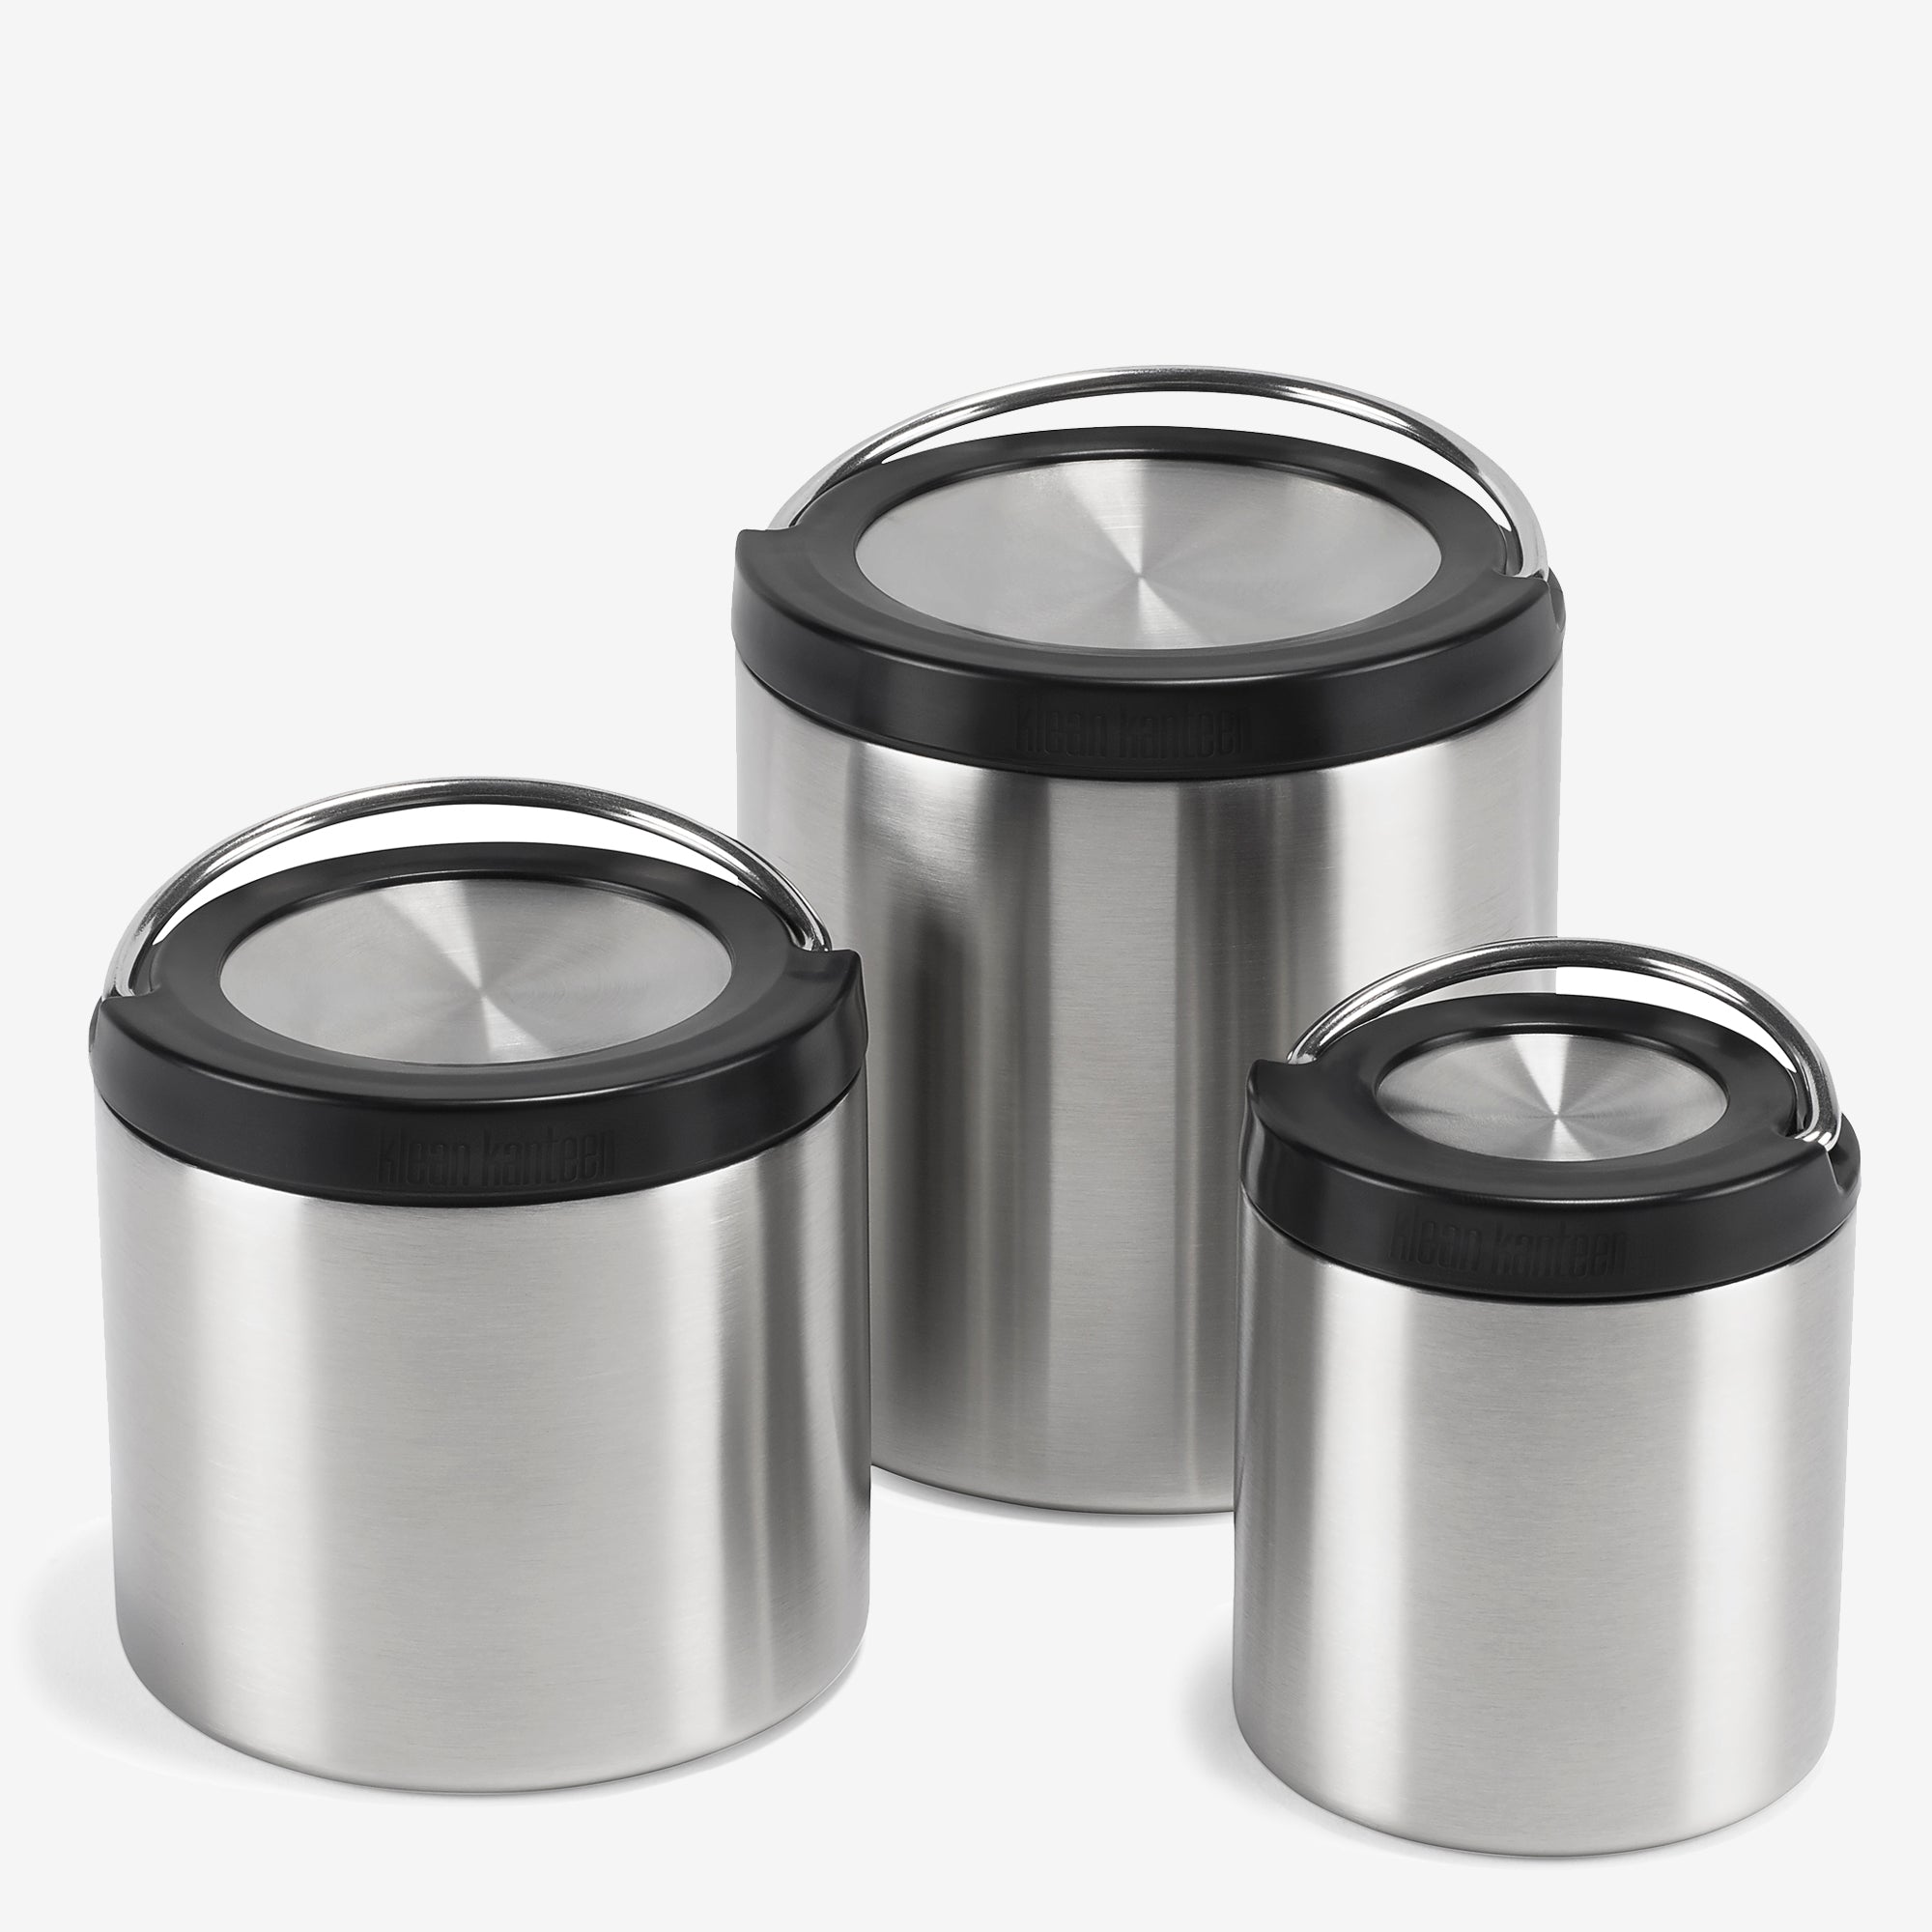 Small Thermos Food Jar for Women, Men & Kids - Stainless Steel